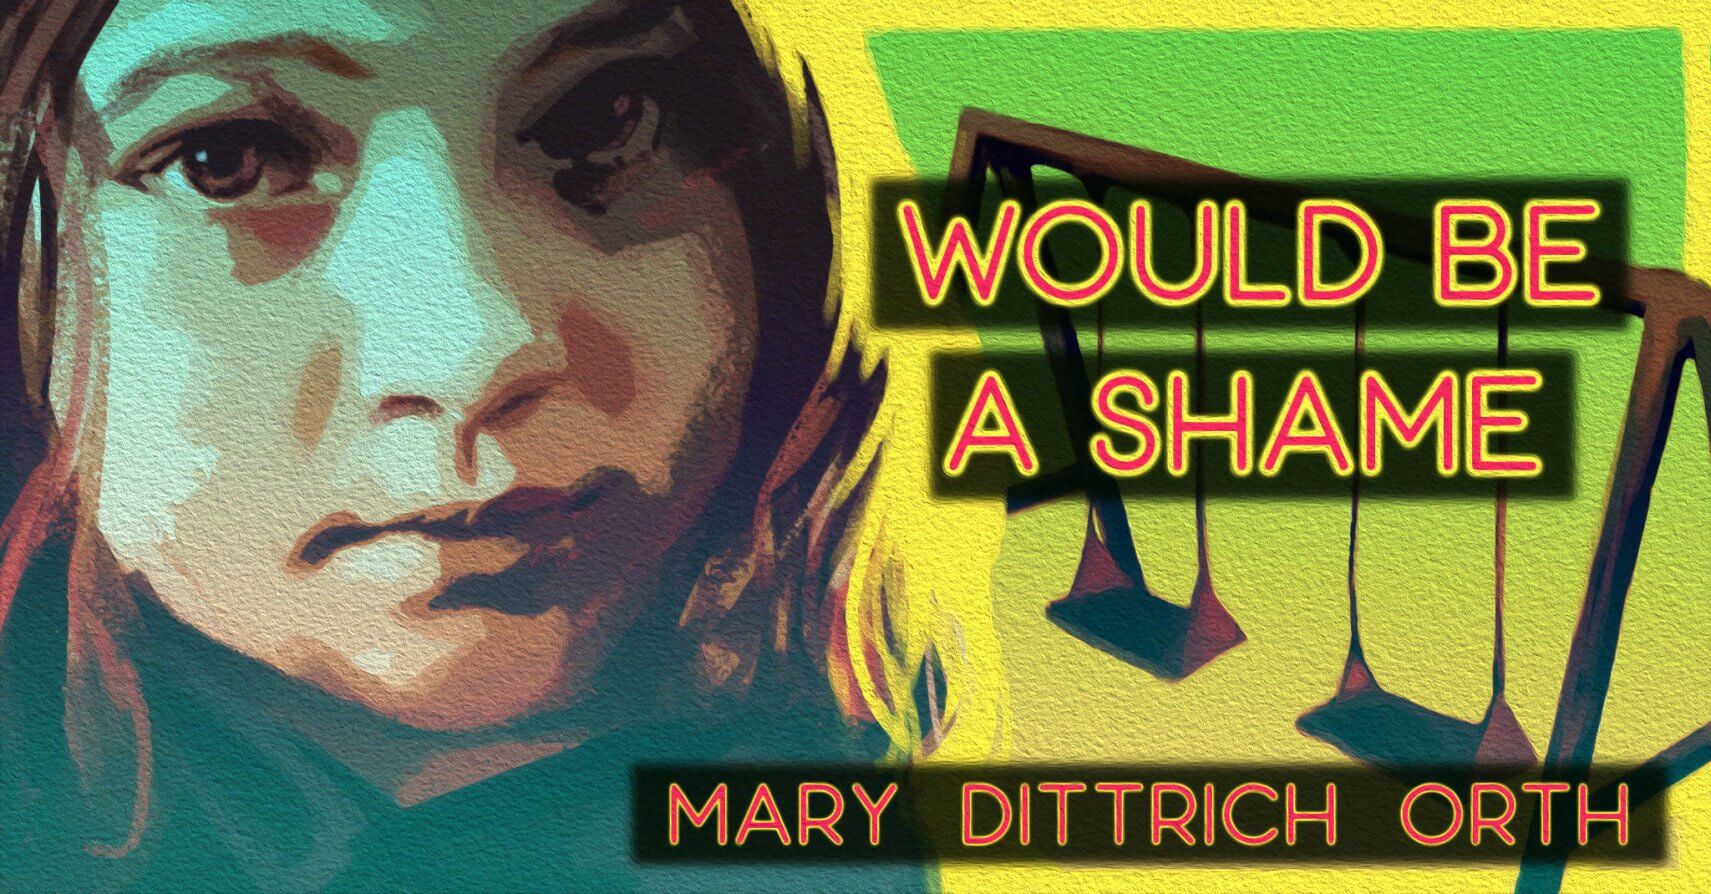 WOULD BE A SHAME by Mary Dittrich Orth